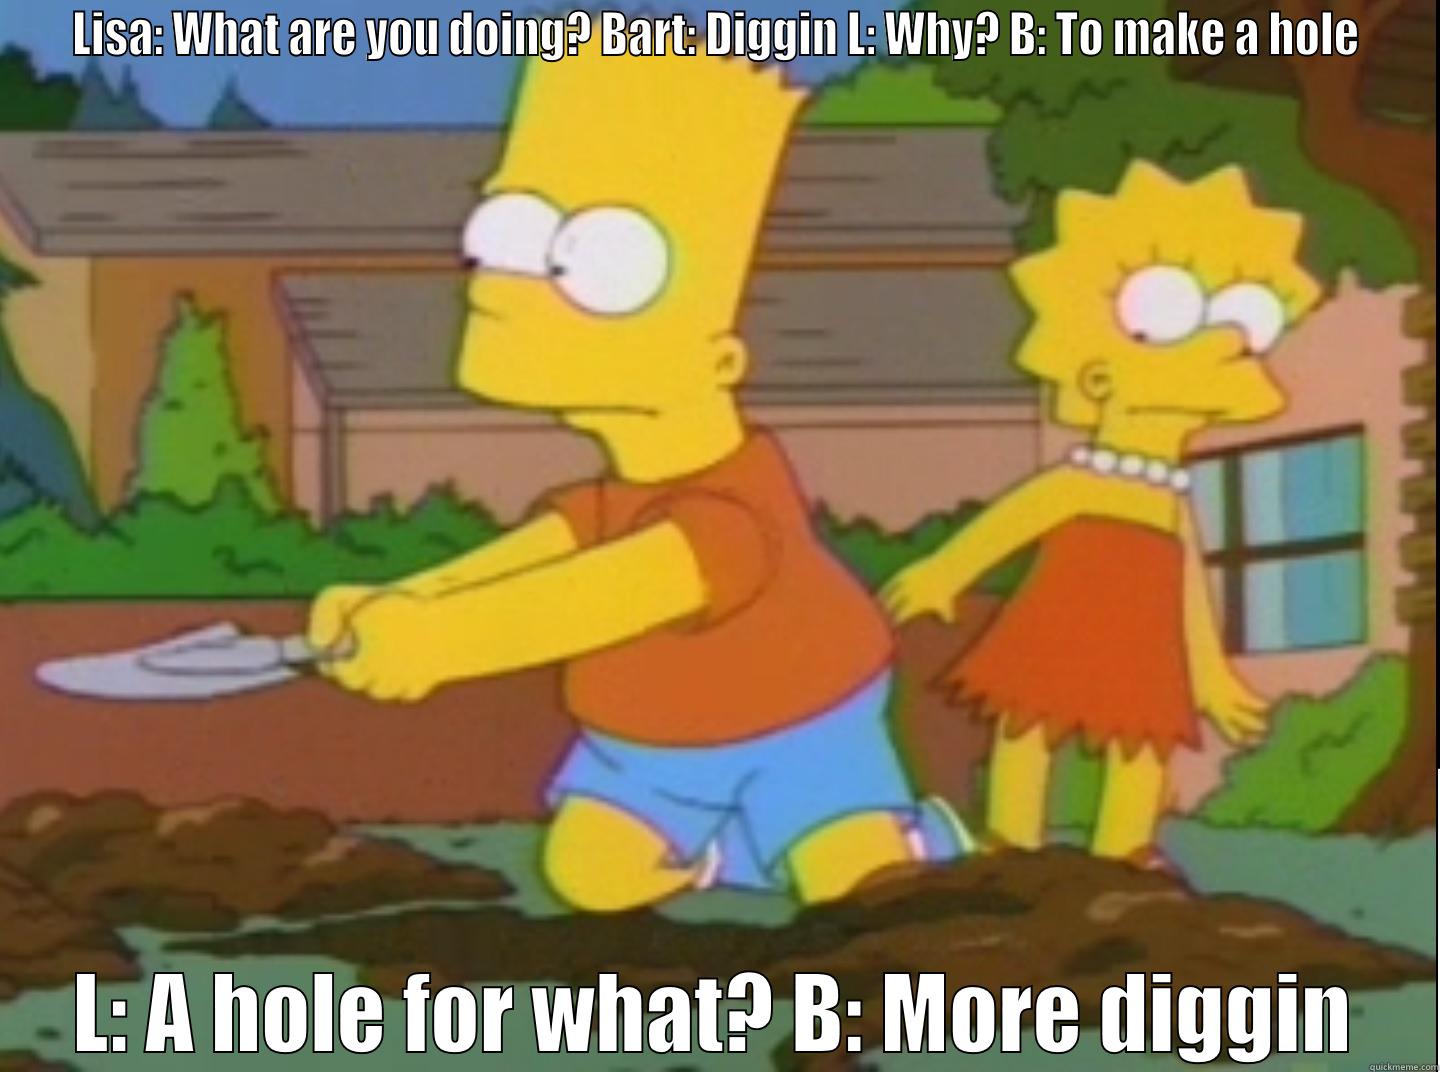 LISA: WHAT ARE YOU DOING? BART: DIGGIN L: WHY? B: TO MAKE A HOLE L: A HOLE FOR WHAT? B: MORE DIGGIN Misc